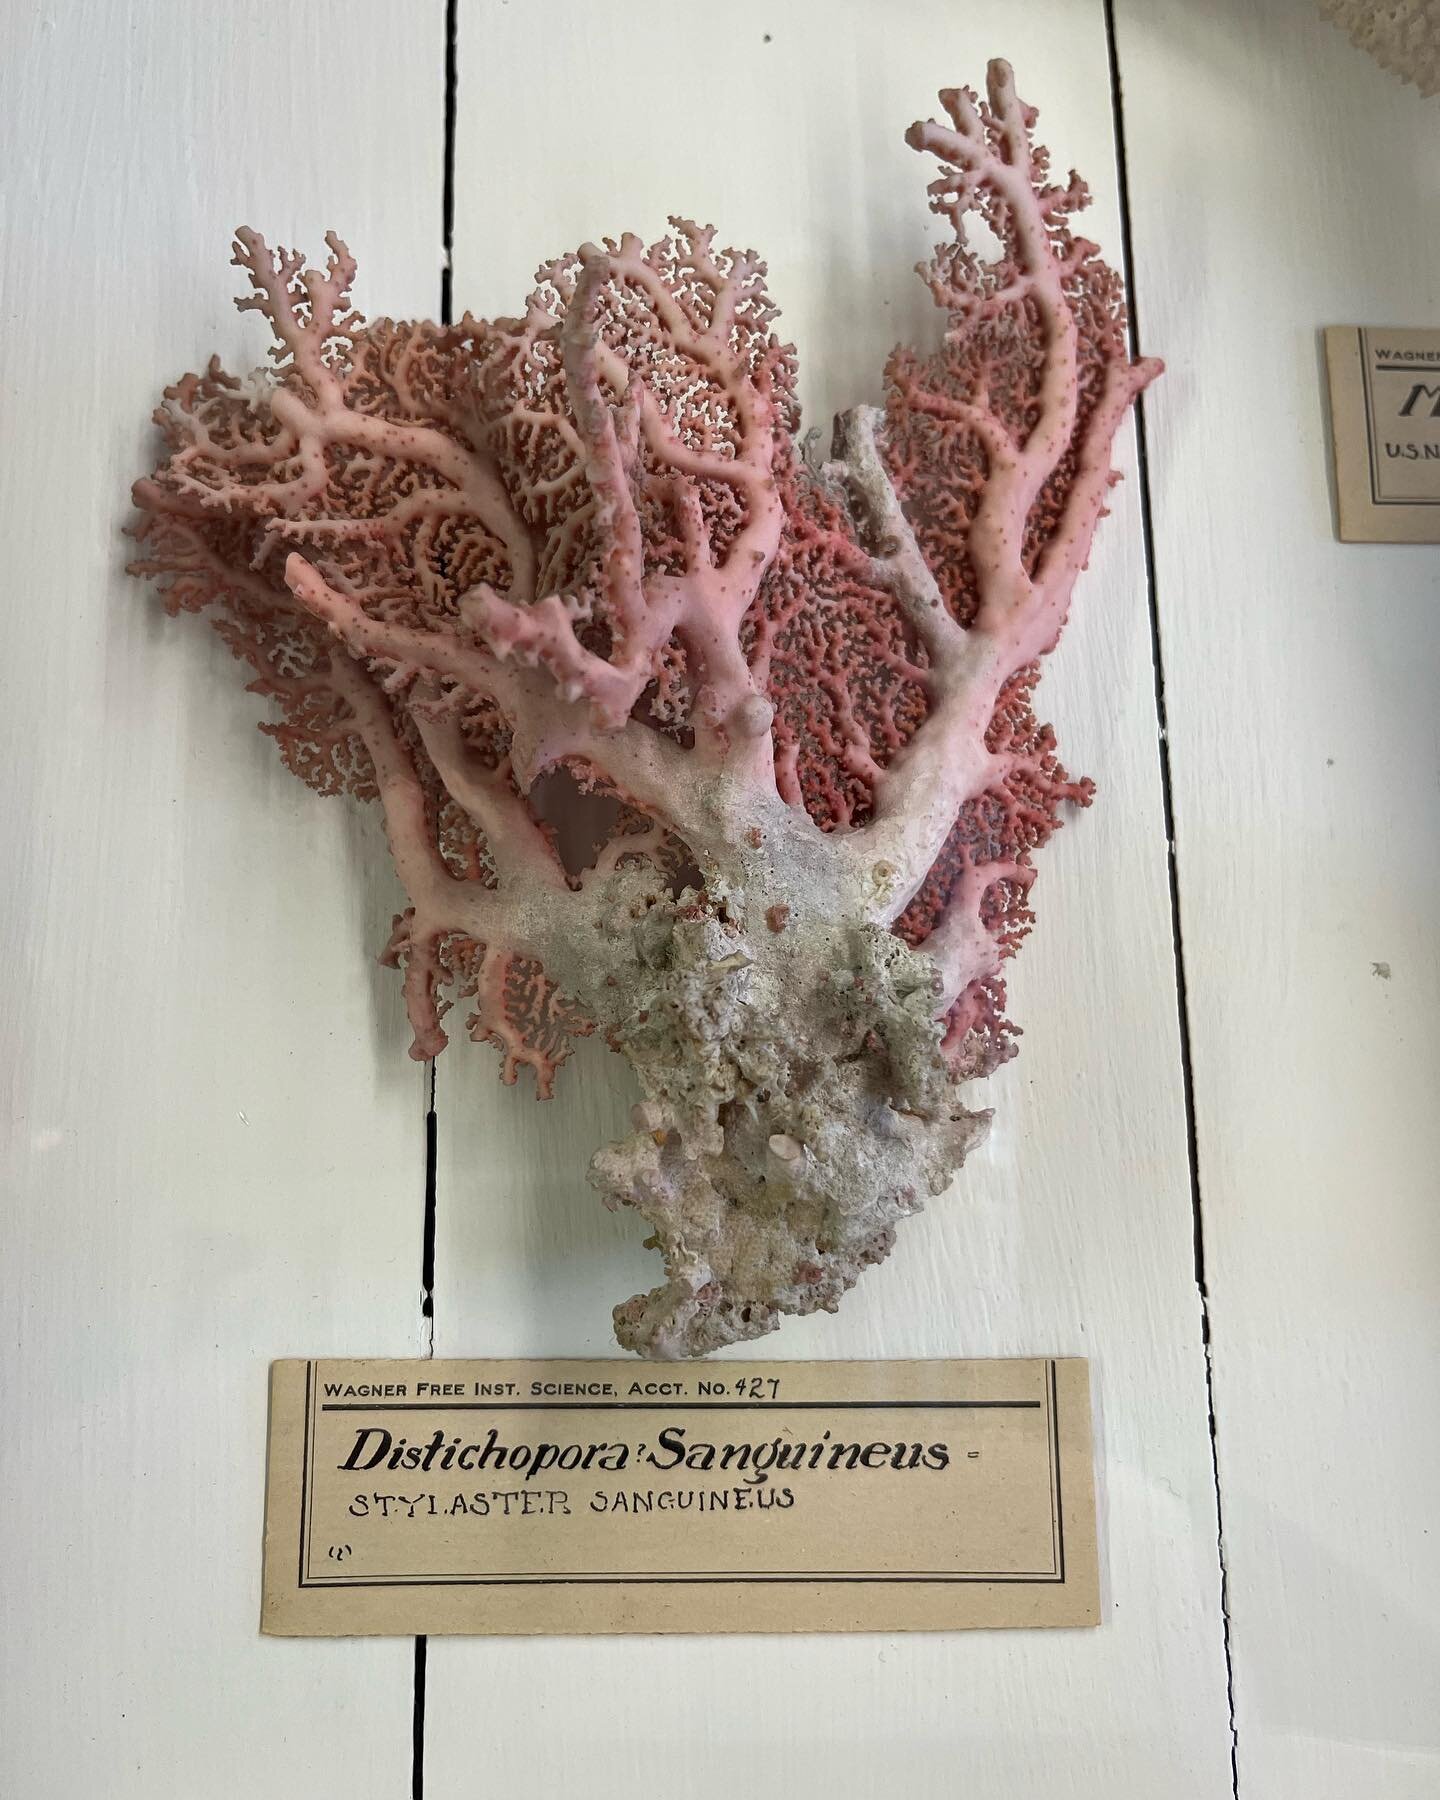 Some super cool (and old) coral specimens found at the Wagner Free Institute of Science today!